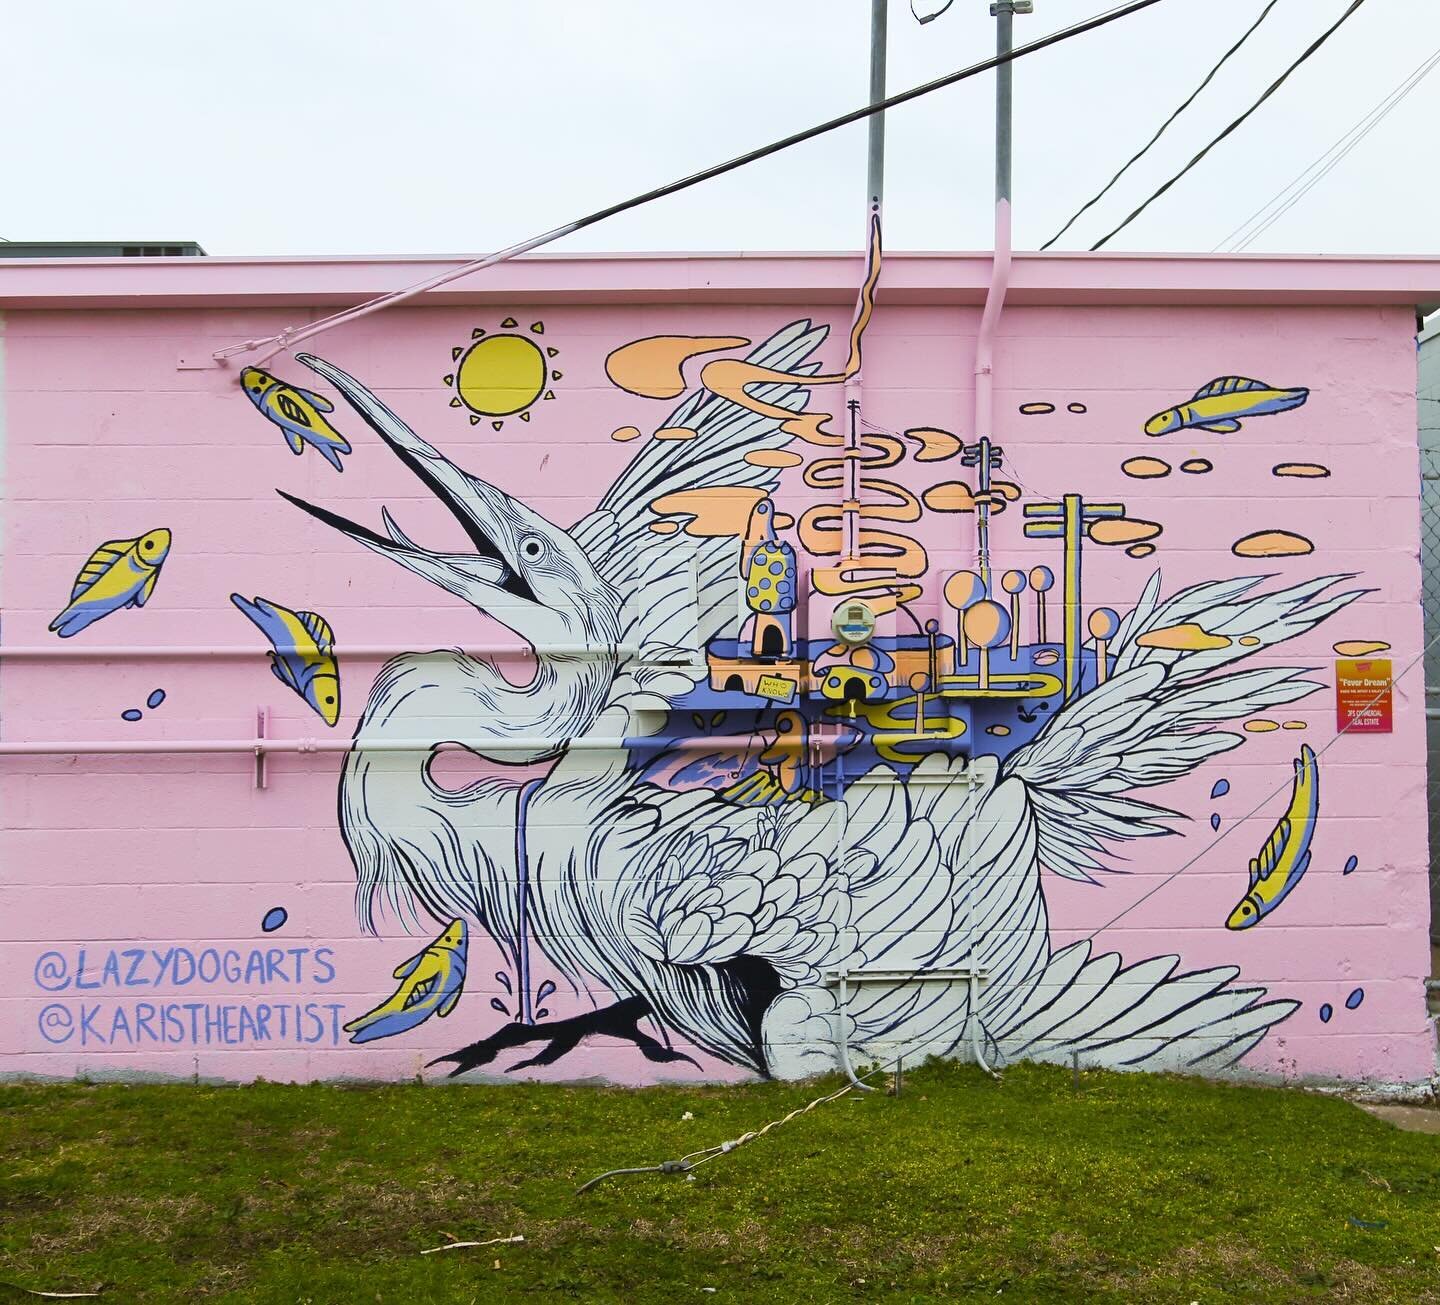 Happy Saturday, you made it!😎 Check out artist team Karis Chambers (@karistheartist) and Haley Bell (@lazydogarts)&rsquo;s mural &ldquo;Fever Dream&rdquo; for the 2023 fest!🥵🔥💯 We are certainly dreaming of some feverish heat on this icy day..🥶 (